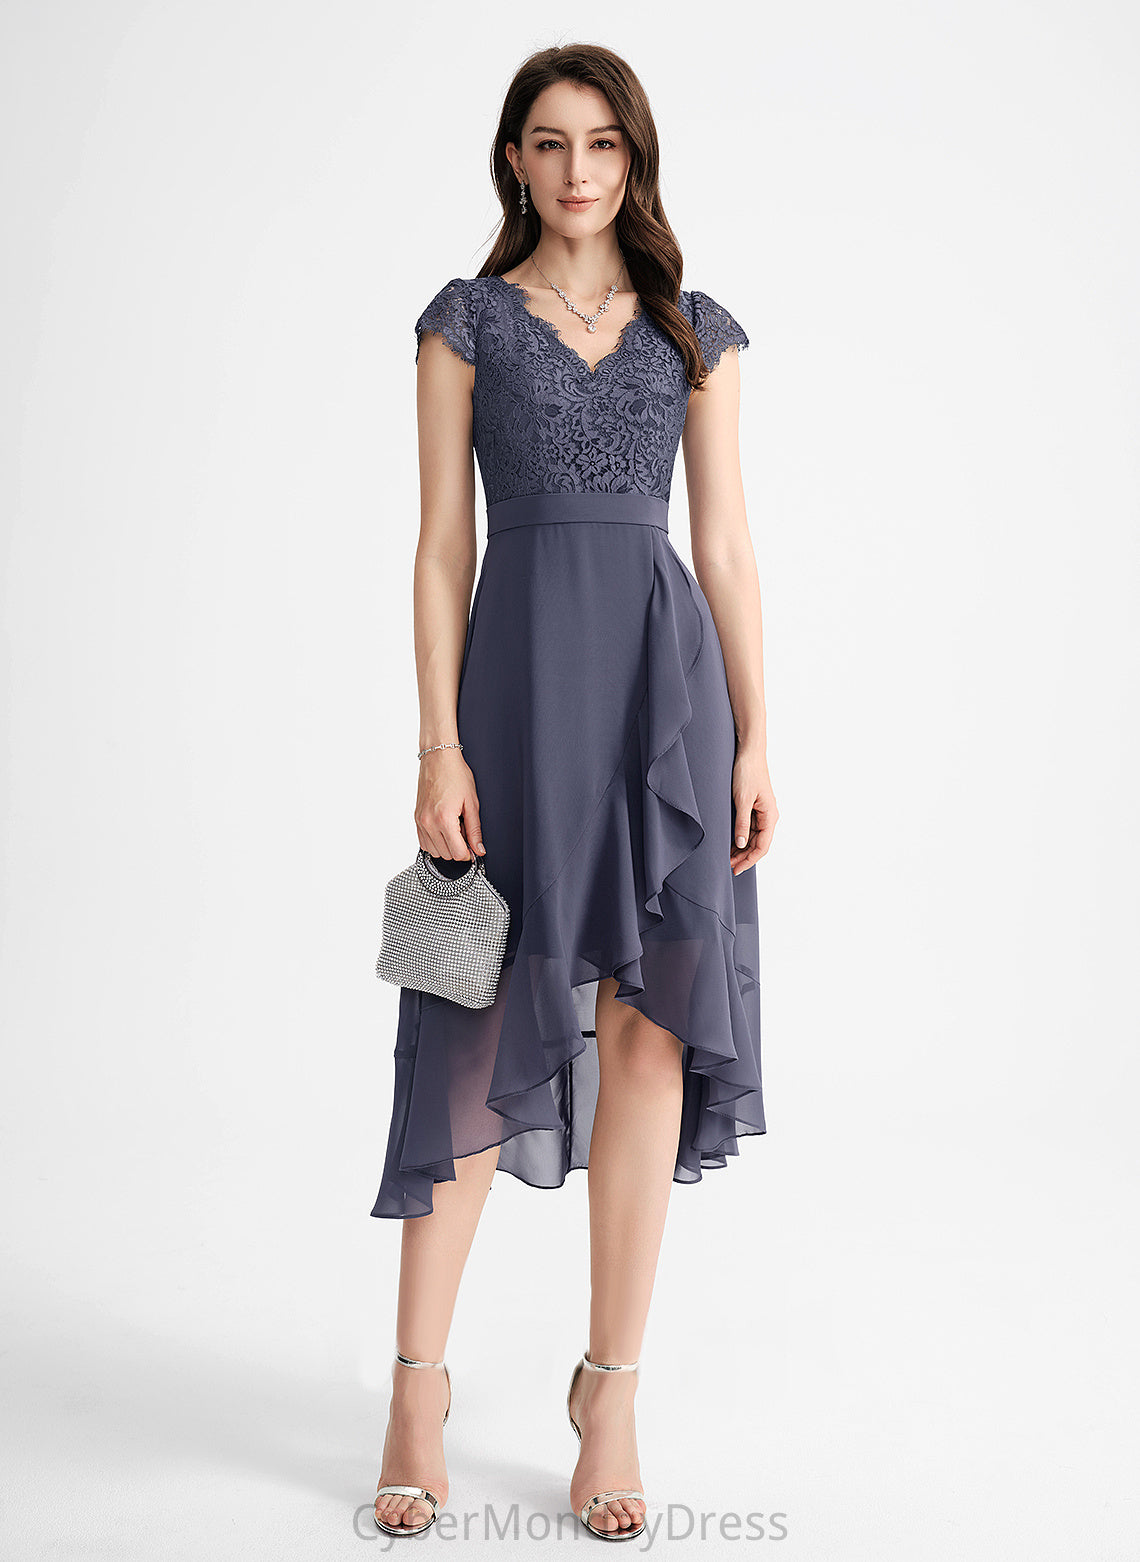 With A-Line Dress Lace V-neck Cascading Cocktail Asymmetrical Germaine Chiffon Cocktail Dresses Ruffles